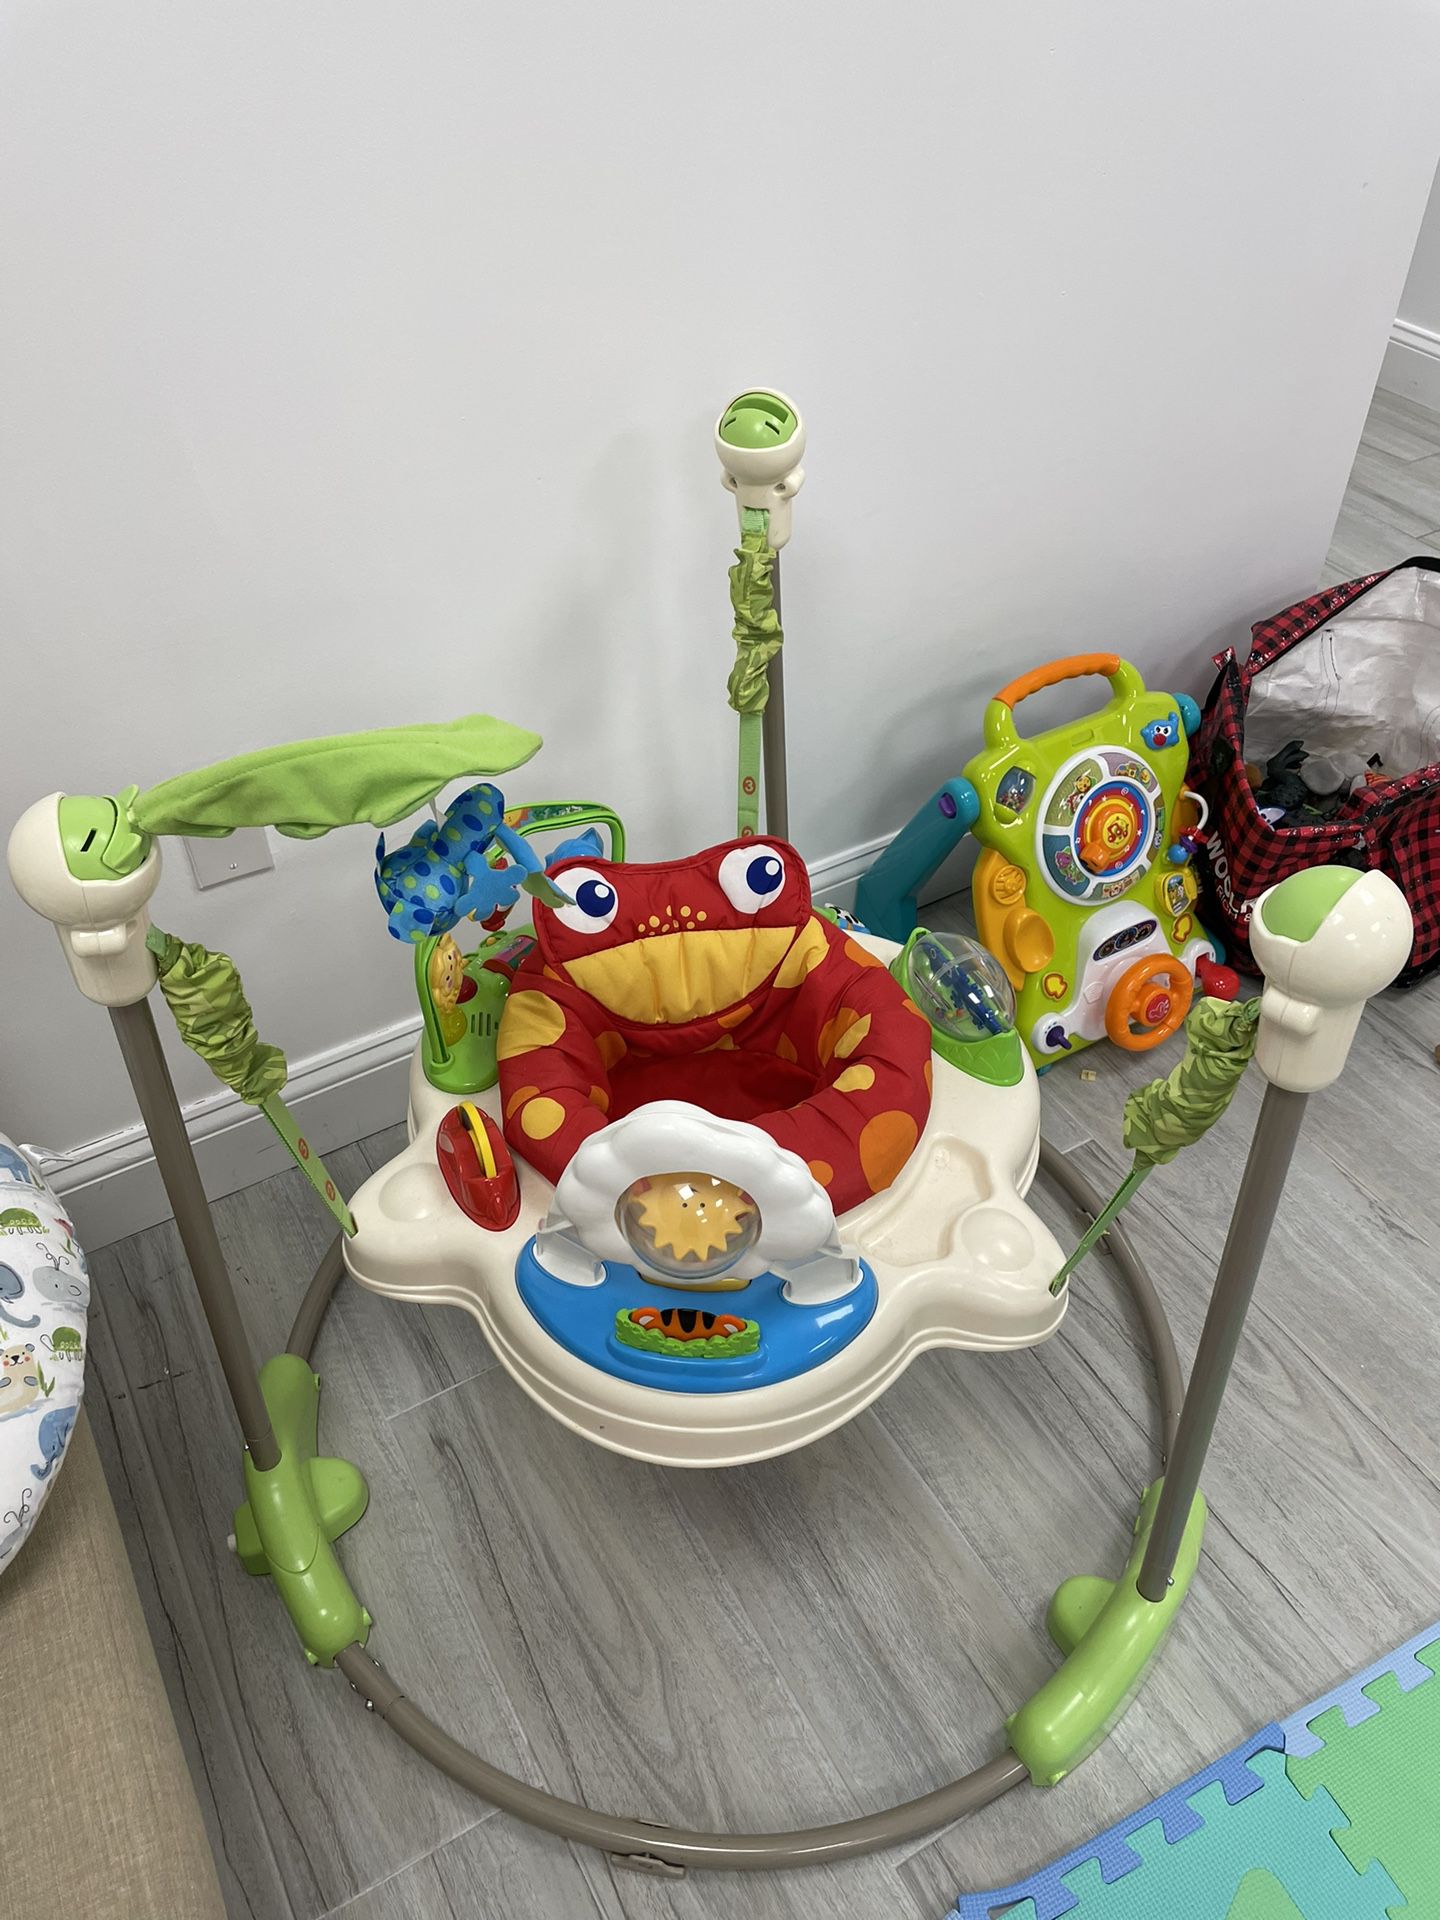 Fisher-Price Baby Jumperoo Bouncer Rainforest Jumperoo Activity-Center with Music Lights Sounds and Developmental Toys